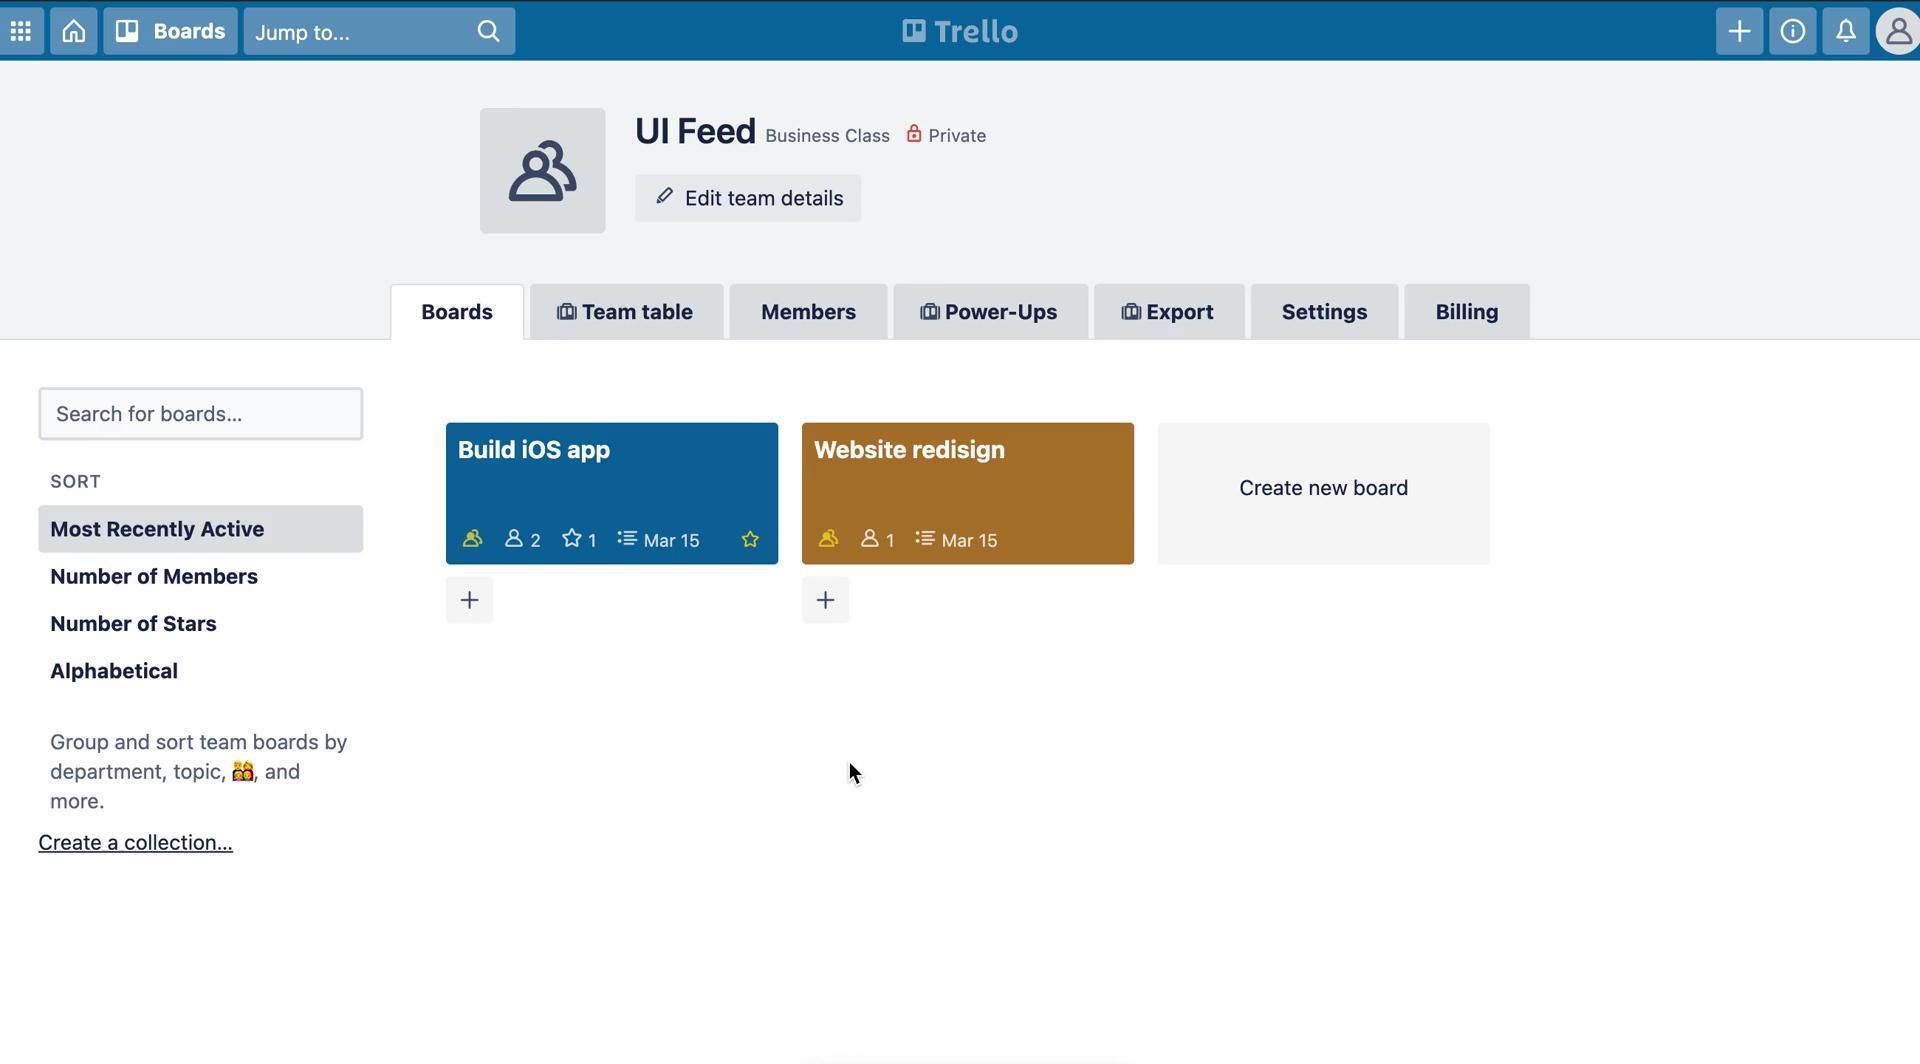 Screenshot of Boards on General browsing on Trello user flow